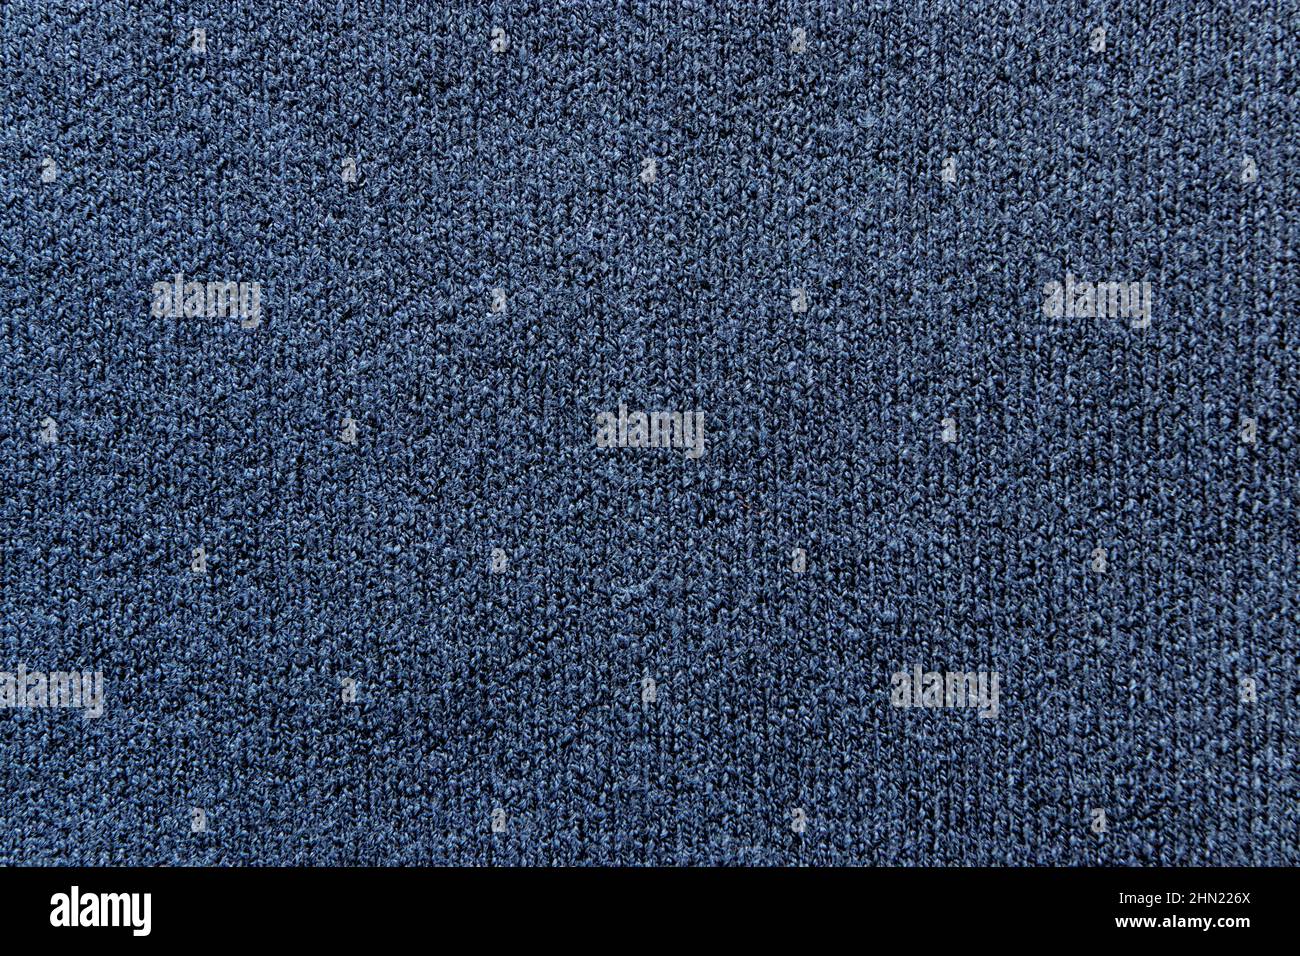 Dark heather blue viscose and polyester jersey fabric texture swatch Stock Photo